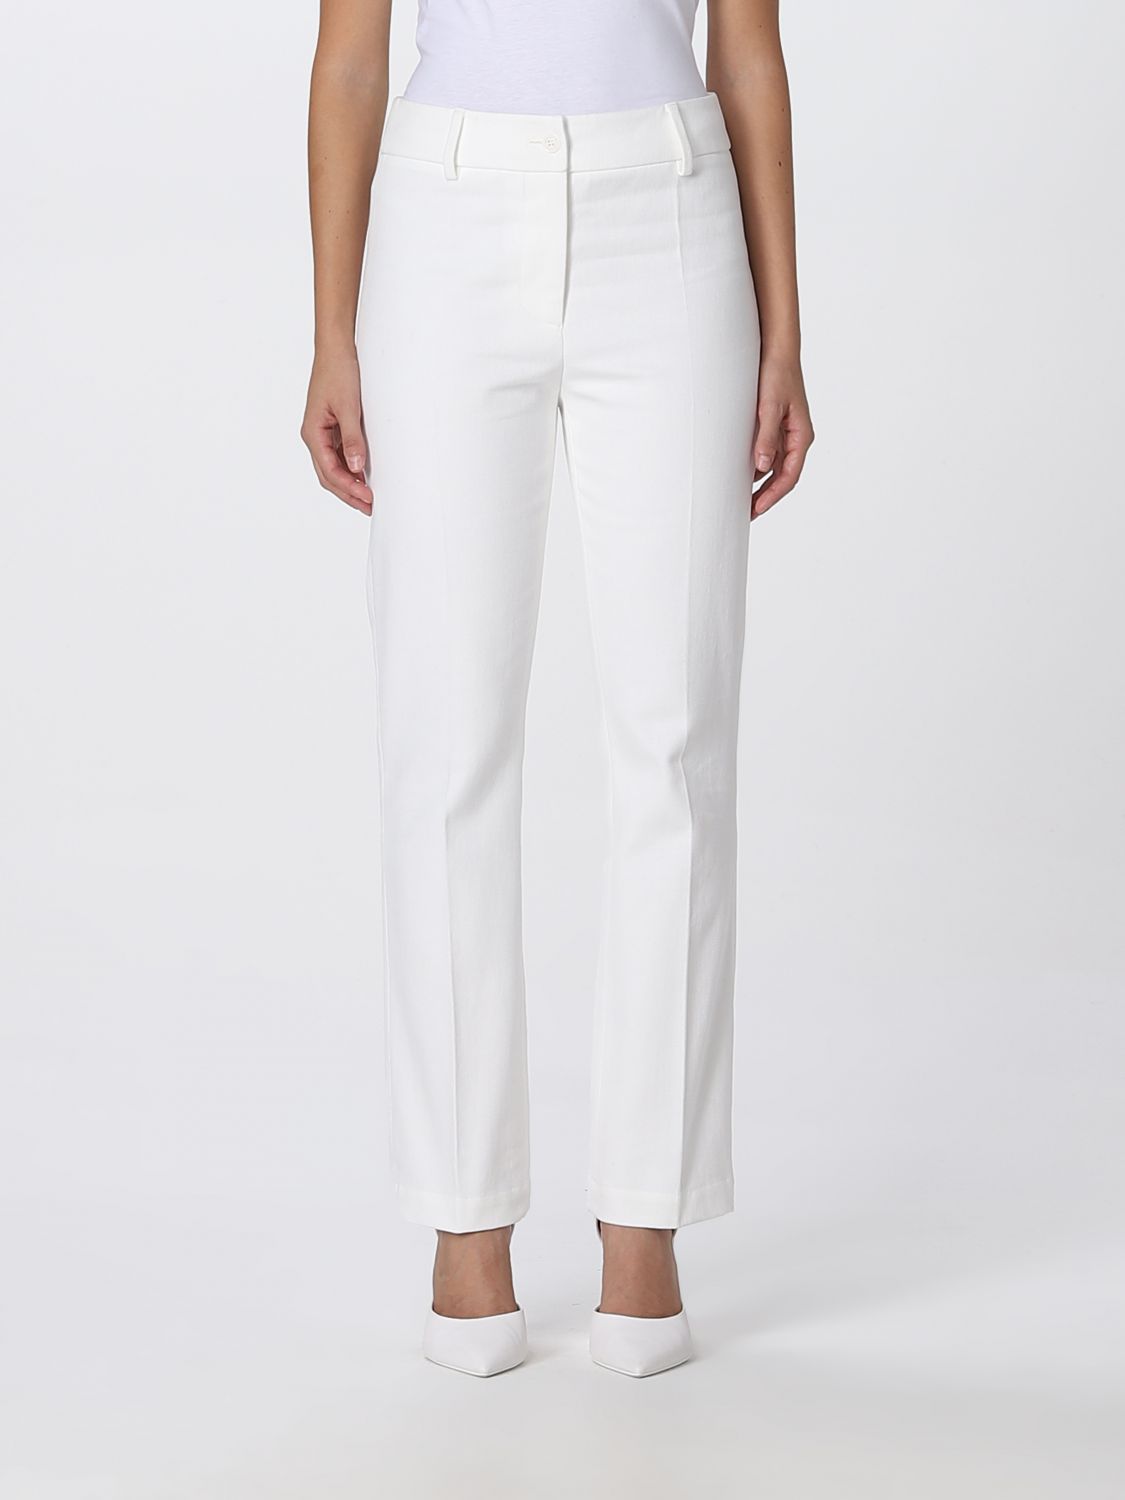 Trousers Boutique Moschino: Boutique Moschino trousers for women white 1